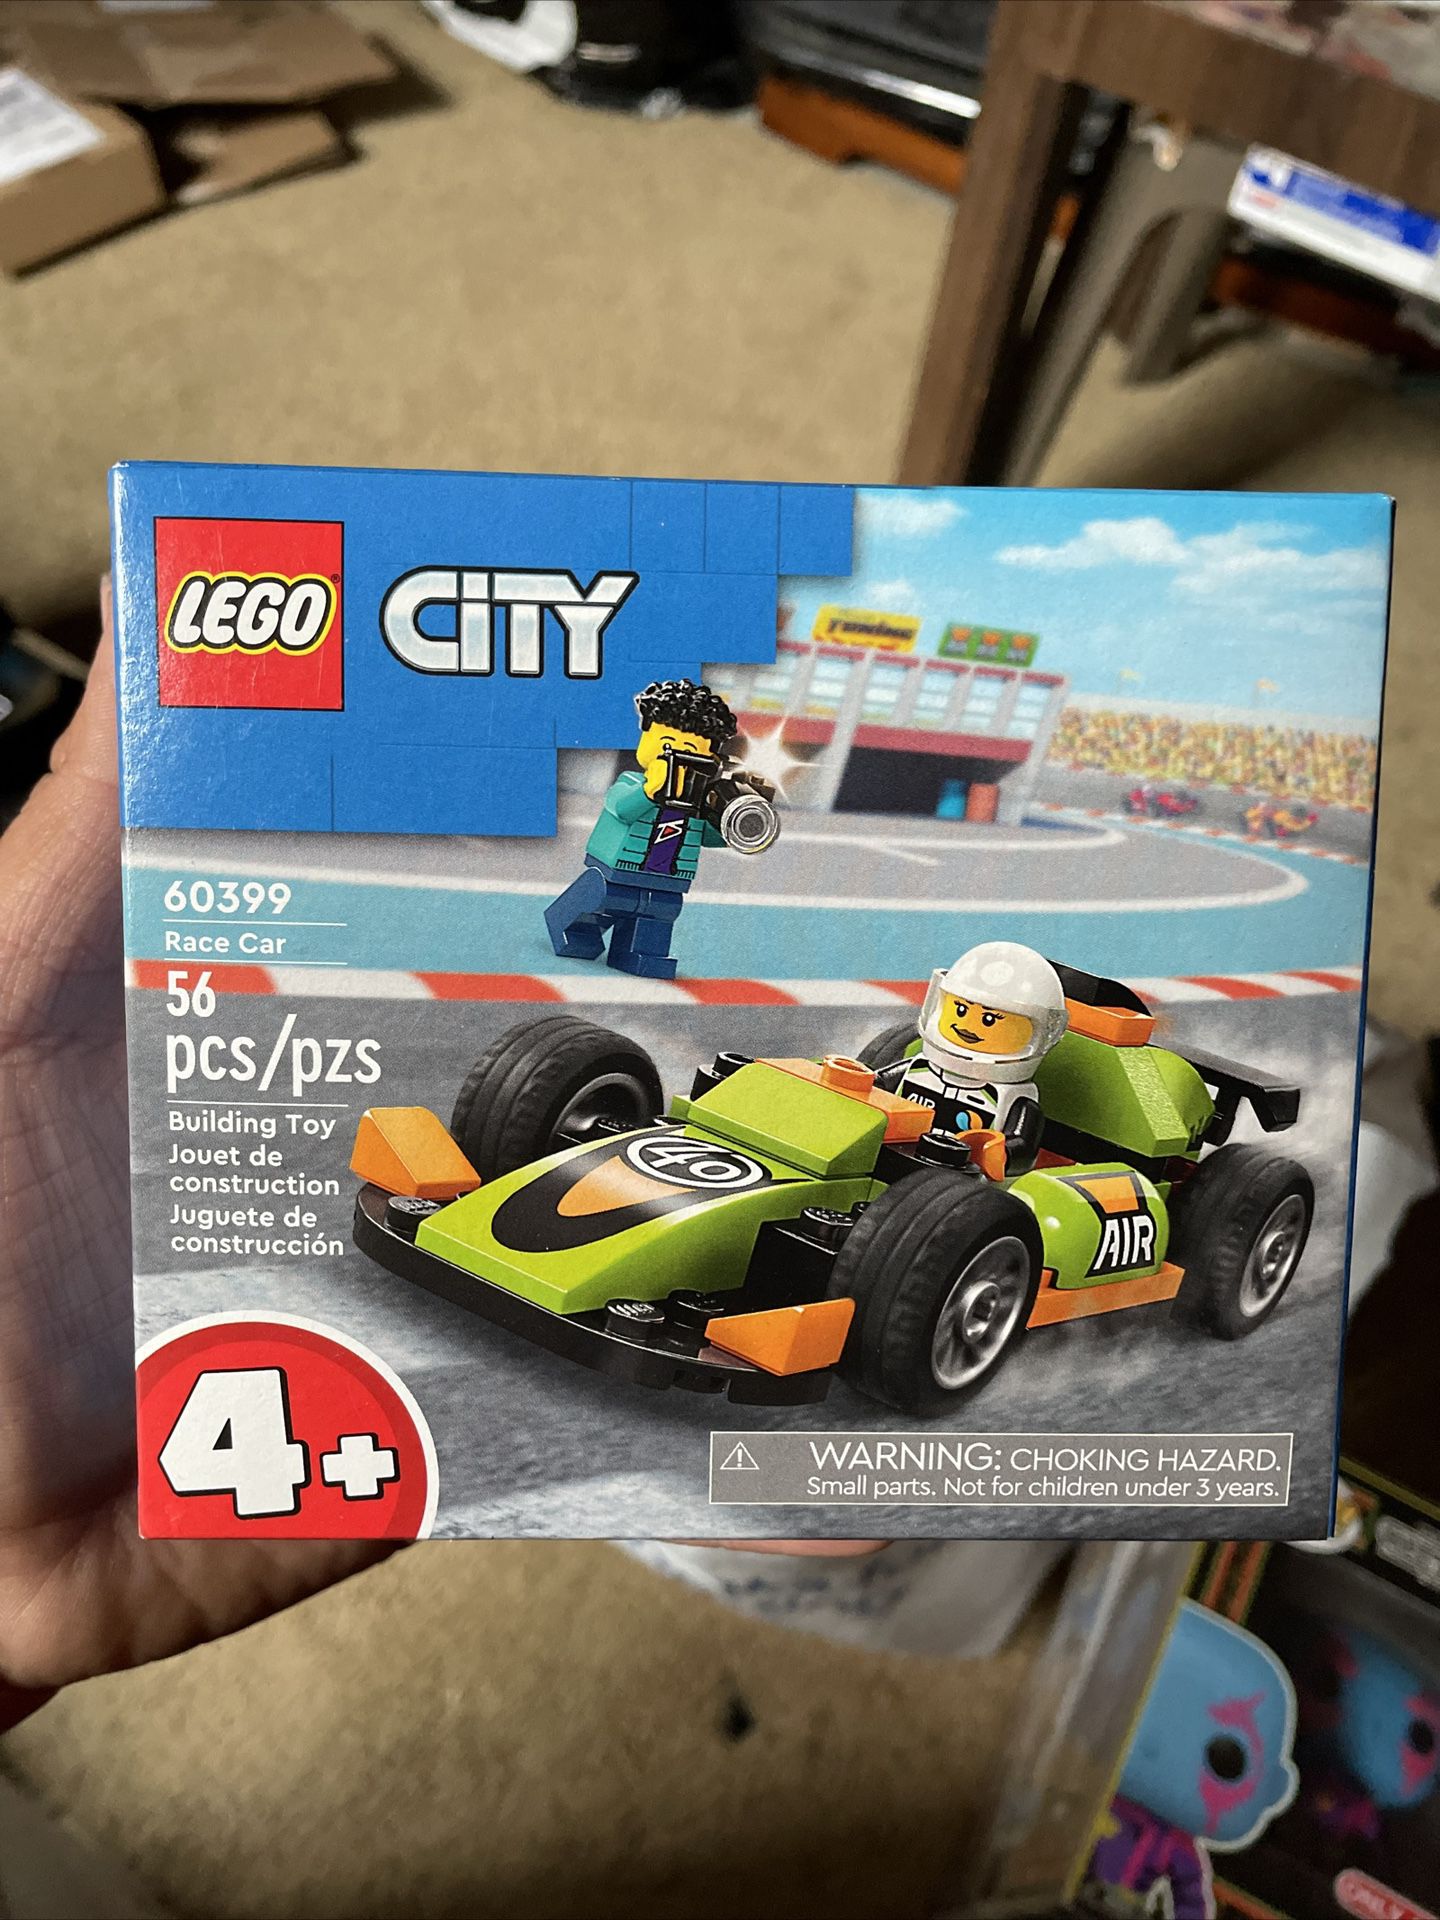 LEGO City Green Race Car Toy, Classic-Style Racing Vehicle Small Toy Kit 60399